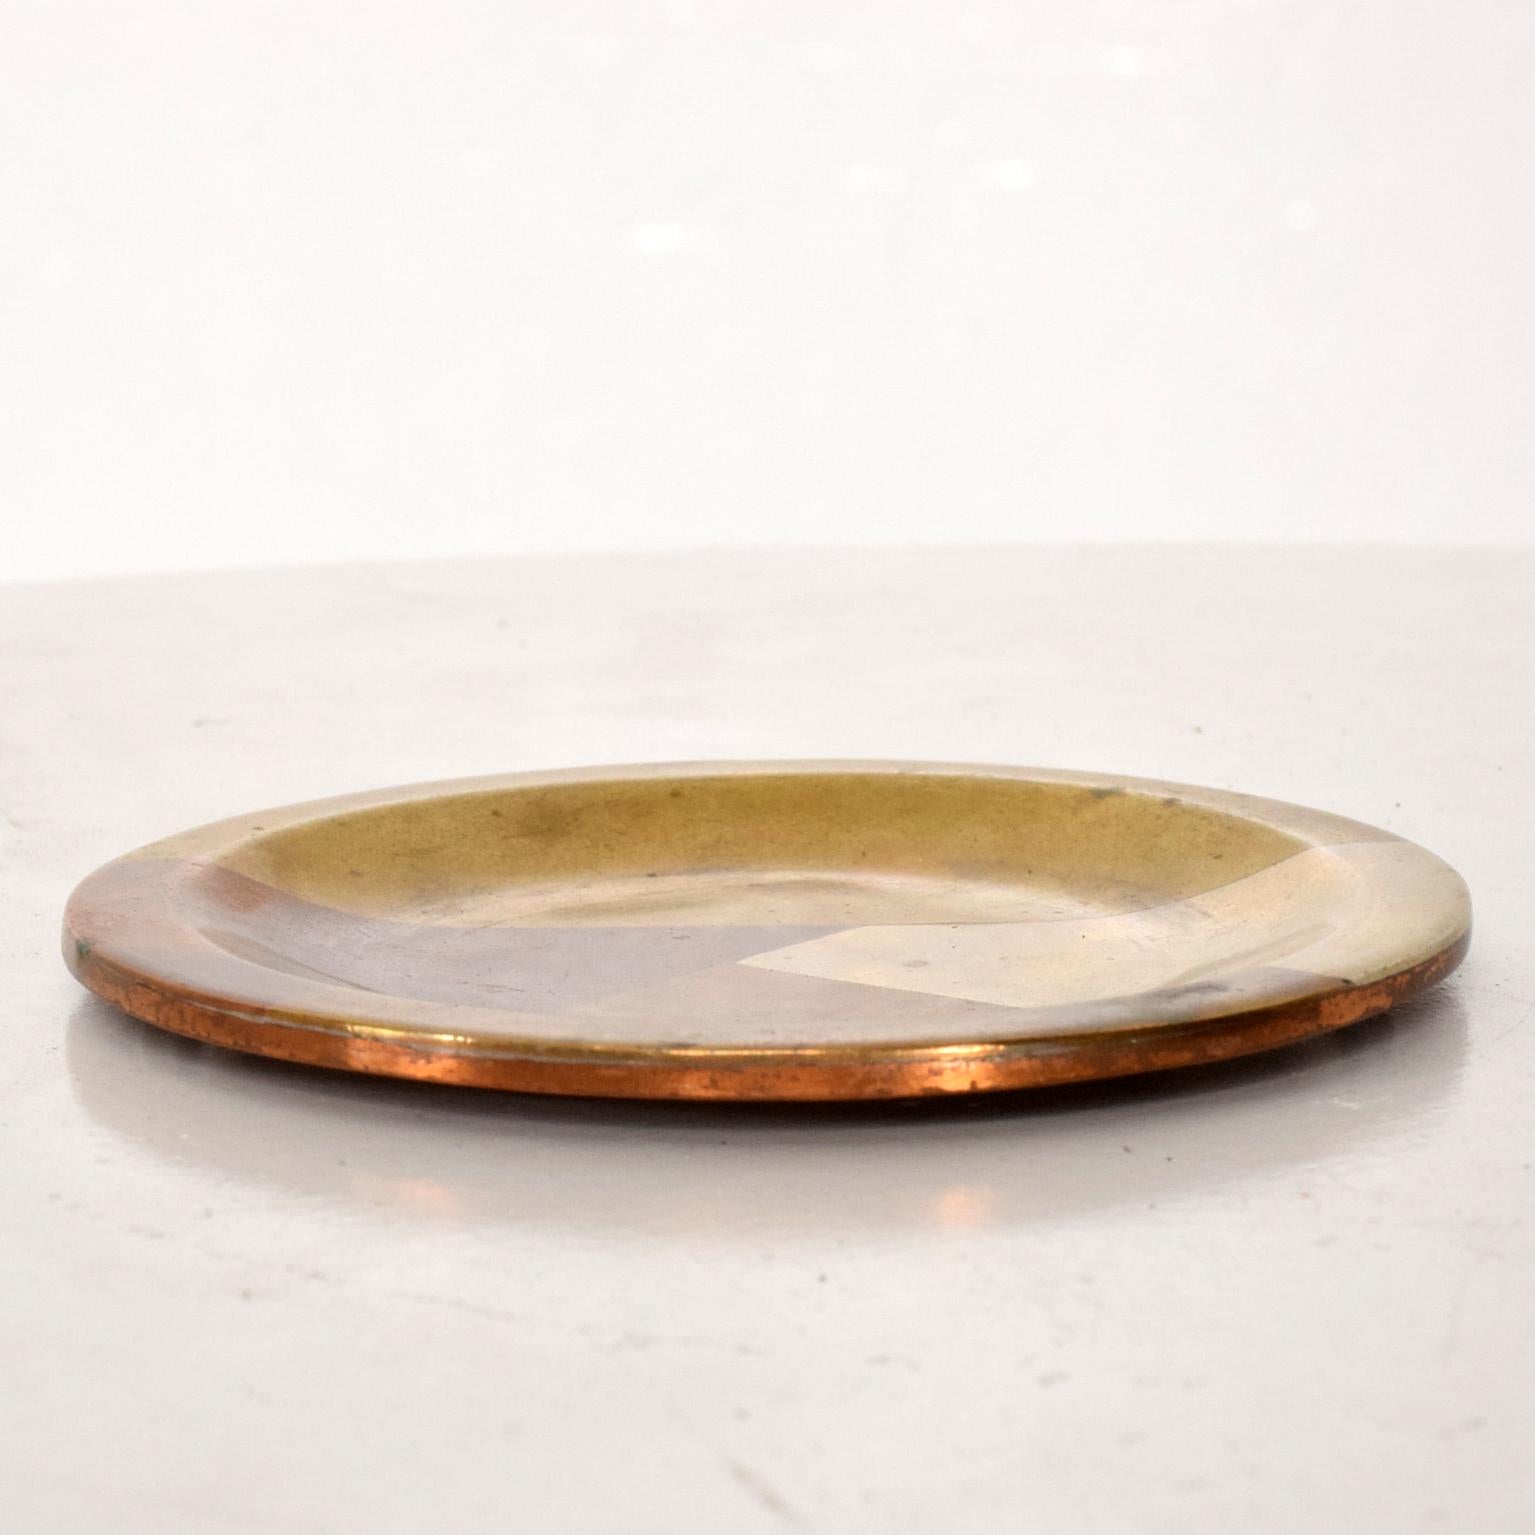 Mid-20th Century Vintage Married Metals Round Decorative Plate Brassy Dish by Los Castillo